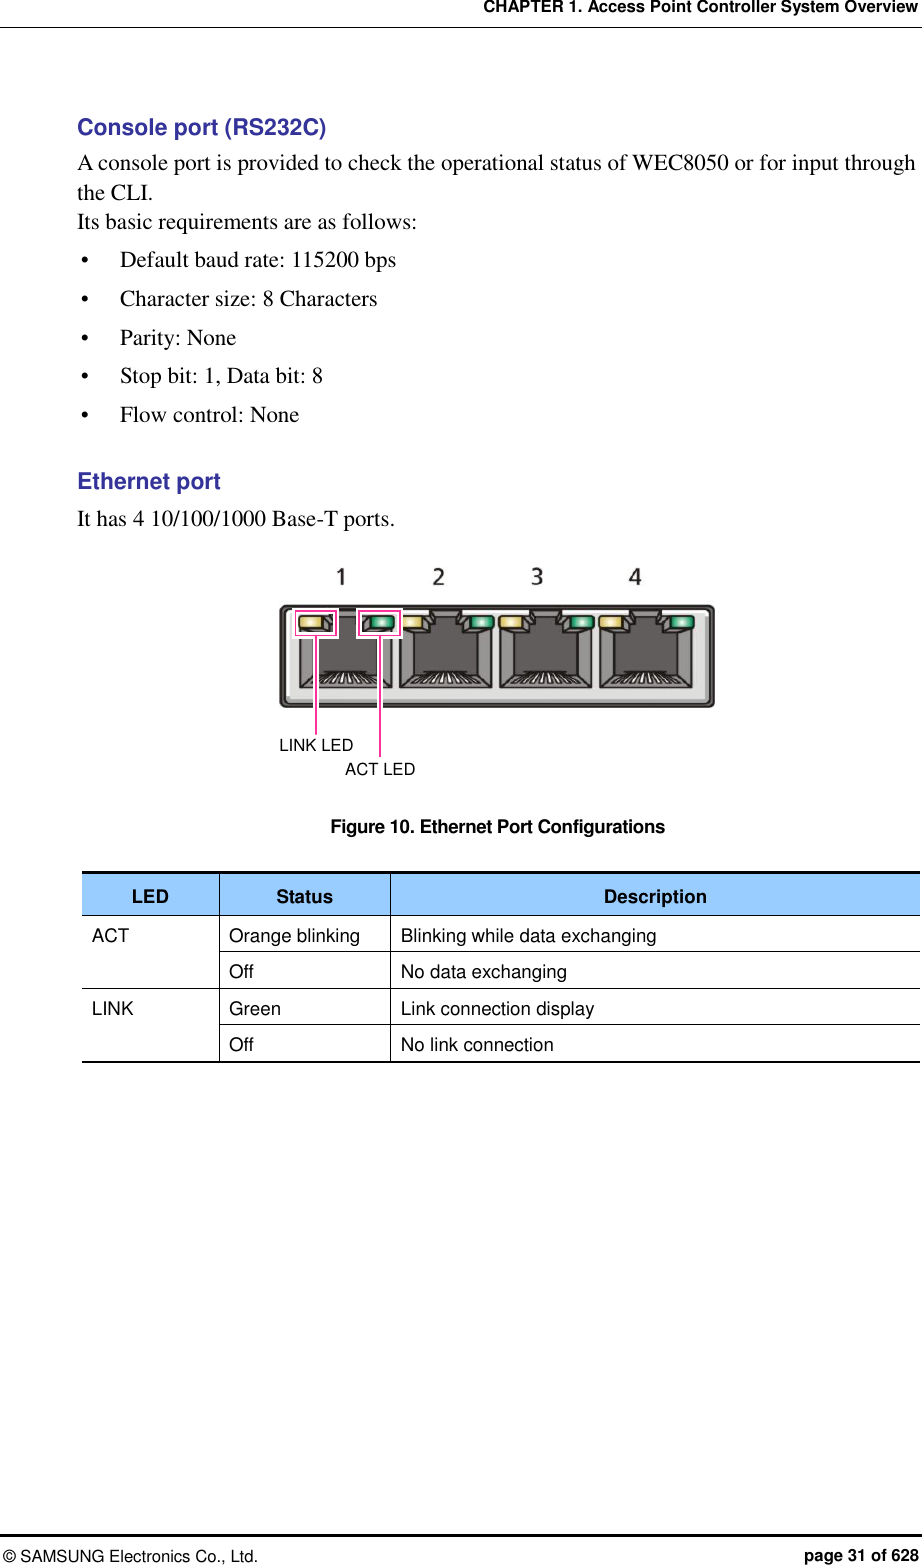 CHAPTER 1. Access Point Controller System Overview ©  SAMSUNG Electronics Co., Ltd.  page 31 of 628 Console port (RS232C) A console port is provided to check the operational status of WEC8050 or for input through the CLI.   Its basic requirements are as follows:  Default baud rate: 115200 bps  Character size: 8 Characters  Parity: None  Stop bit: 1, Data bit: 8  Flow control: None  Ethernet port It has 4 10/100/1000 Base-T ports.  Figure 10. Ethernet Port Configurations  LED Status Description ACT Orange blinking Blinking while data exchanging Off No data exchanging LINK Green Link connection display Off No link connection  LINK LED ACT LED 